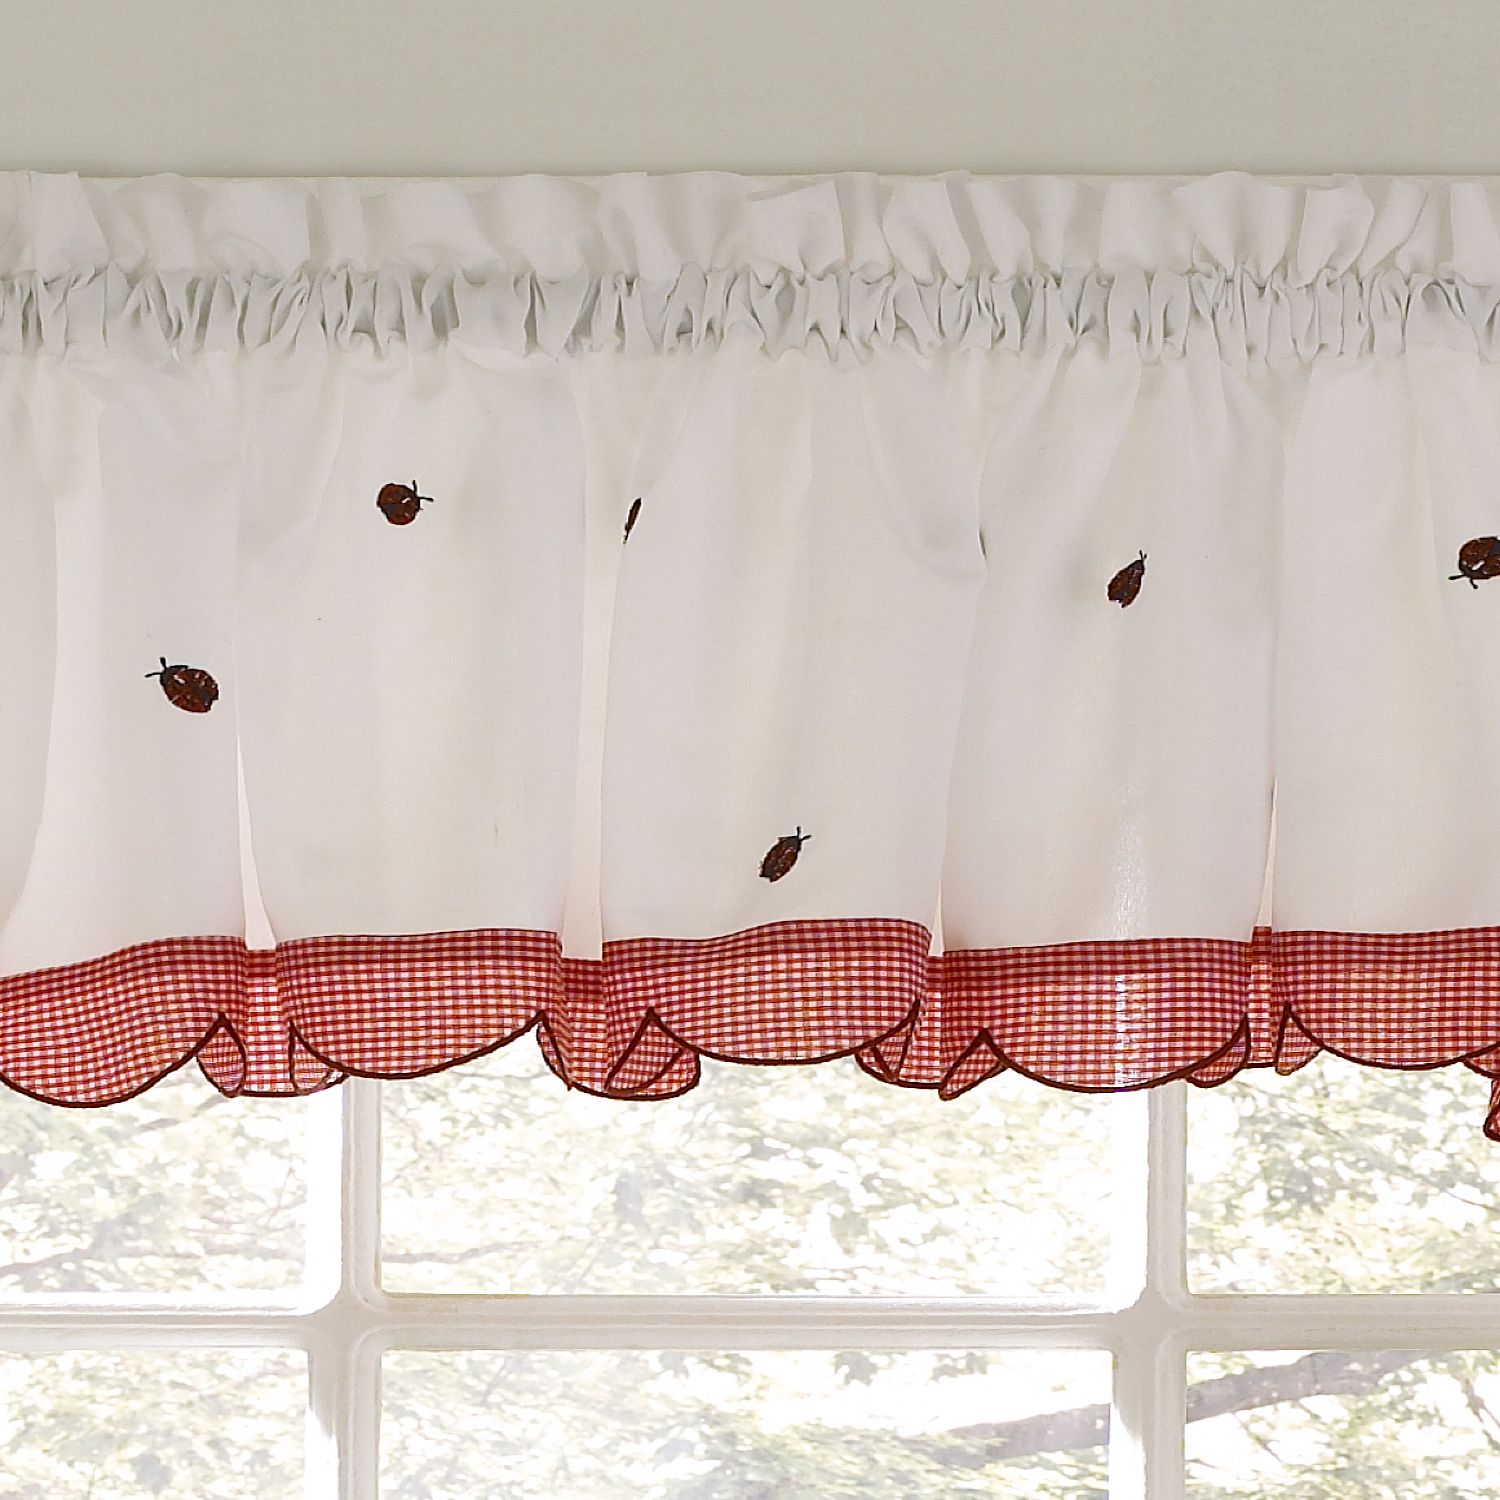 Embroidered Ladybug Meadow Kitchen Curtains 12" X 56" Valance Inside Fashionable Embroidered Ladybugs Window Curtain Pieces (View 4 of 20)